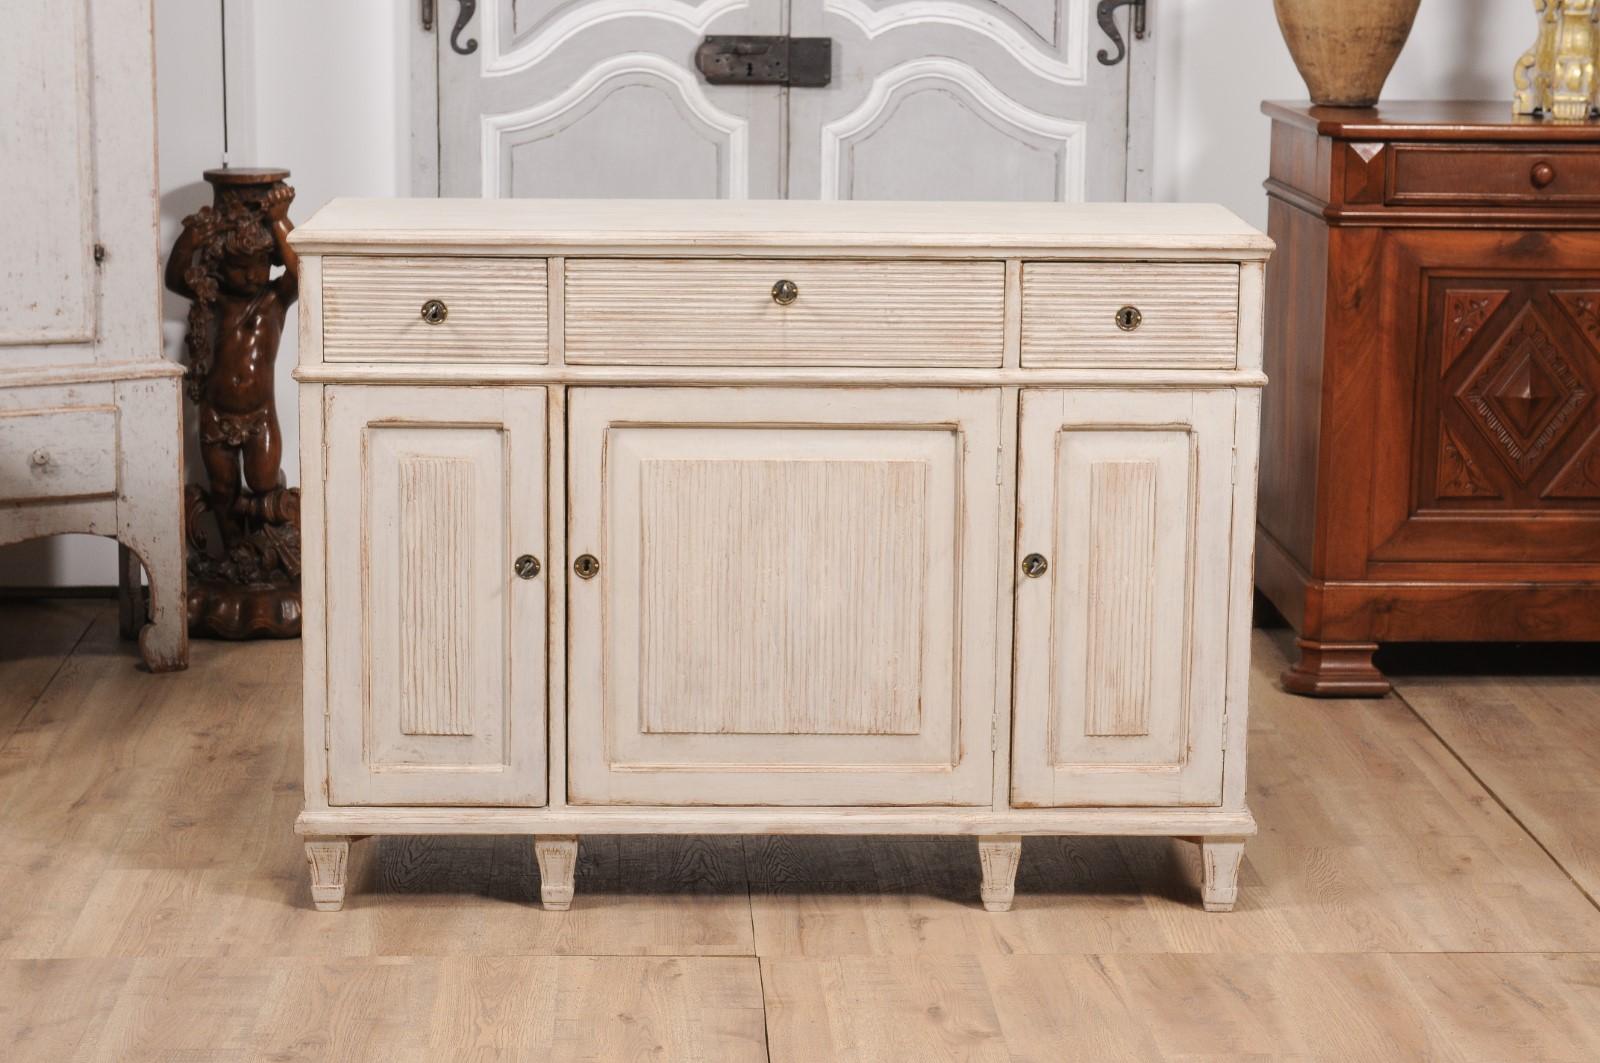 Swedish 1860s Creamy Gray Painted Sideboard with Reeded Doors and Drawers For Sale 4